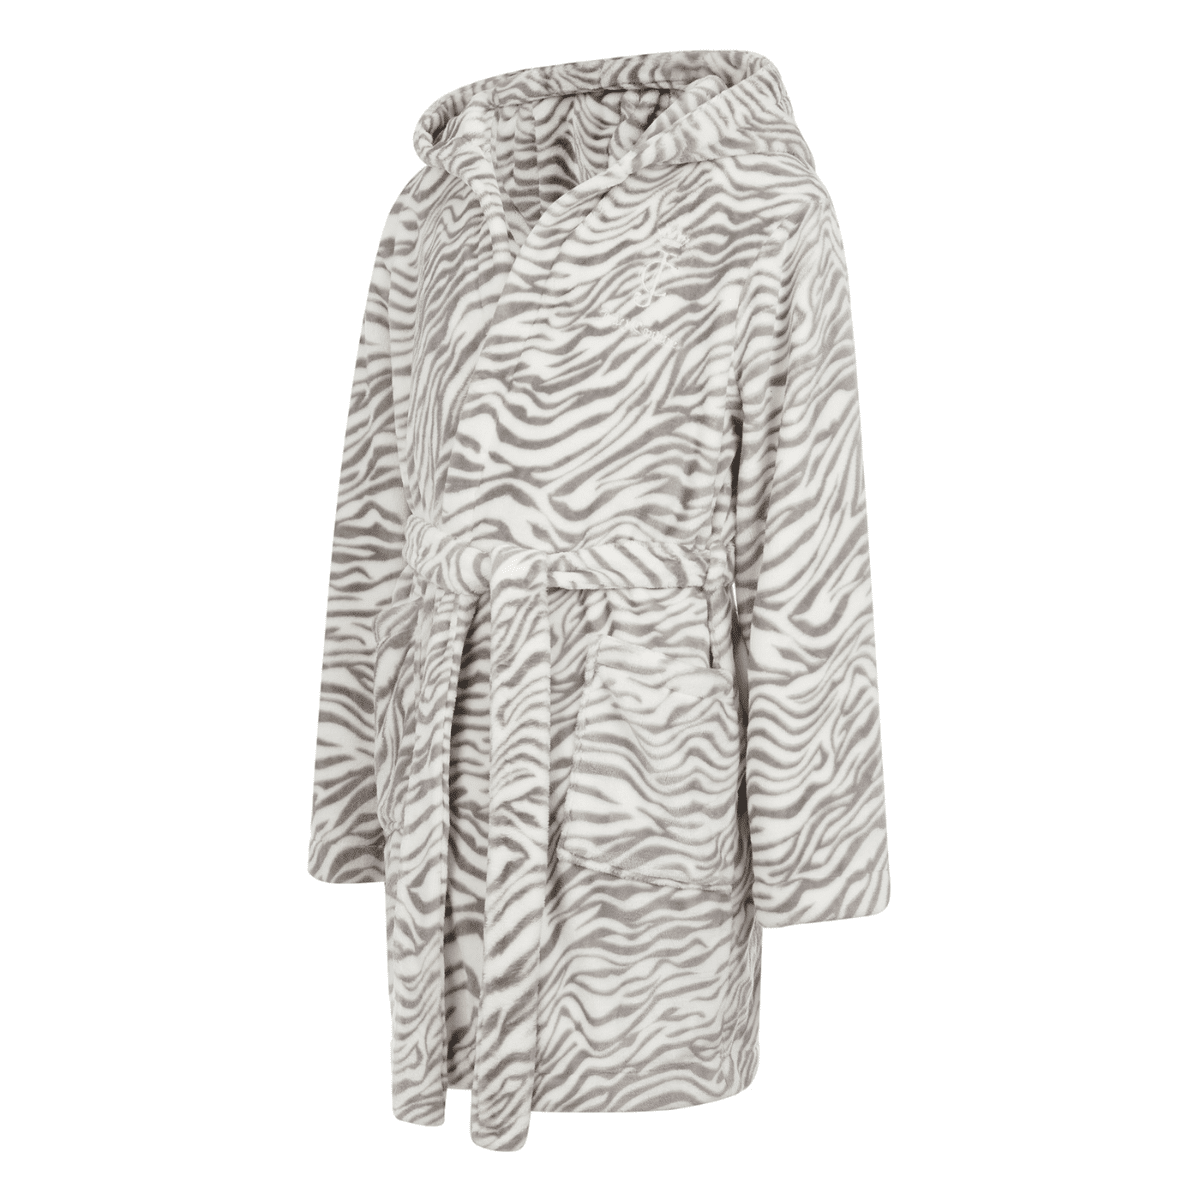 juicy couture girls white and grey tiger dressing gown side view